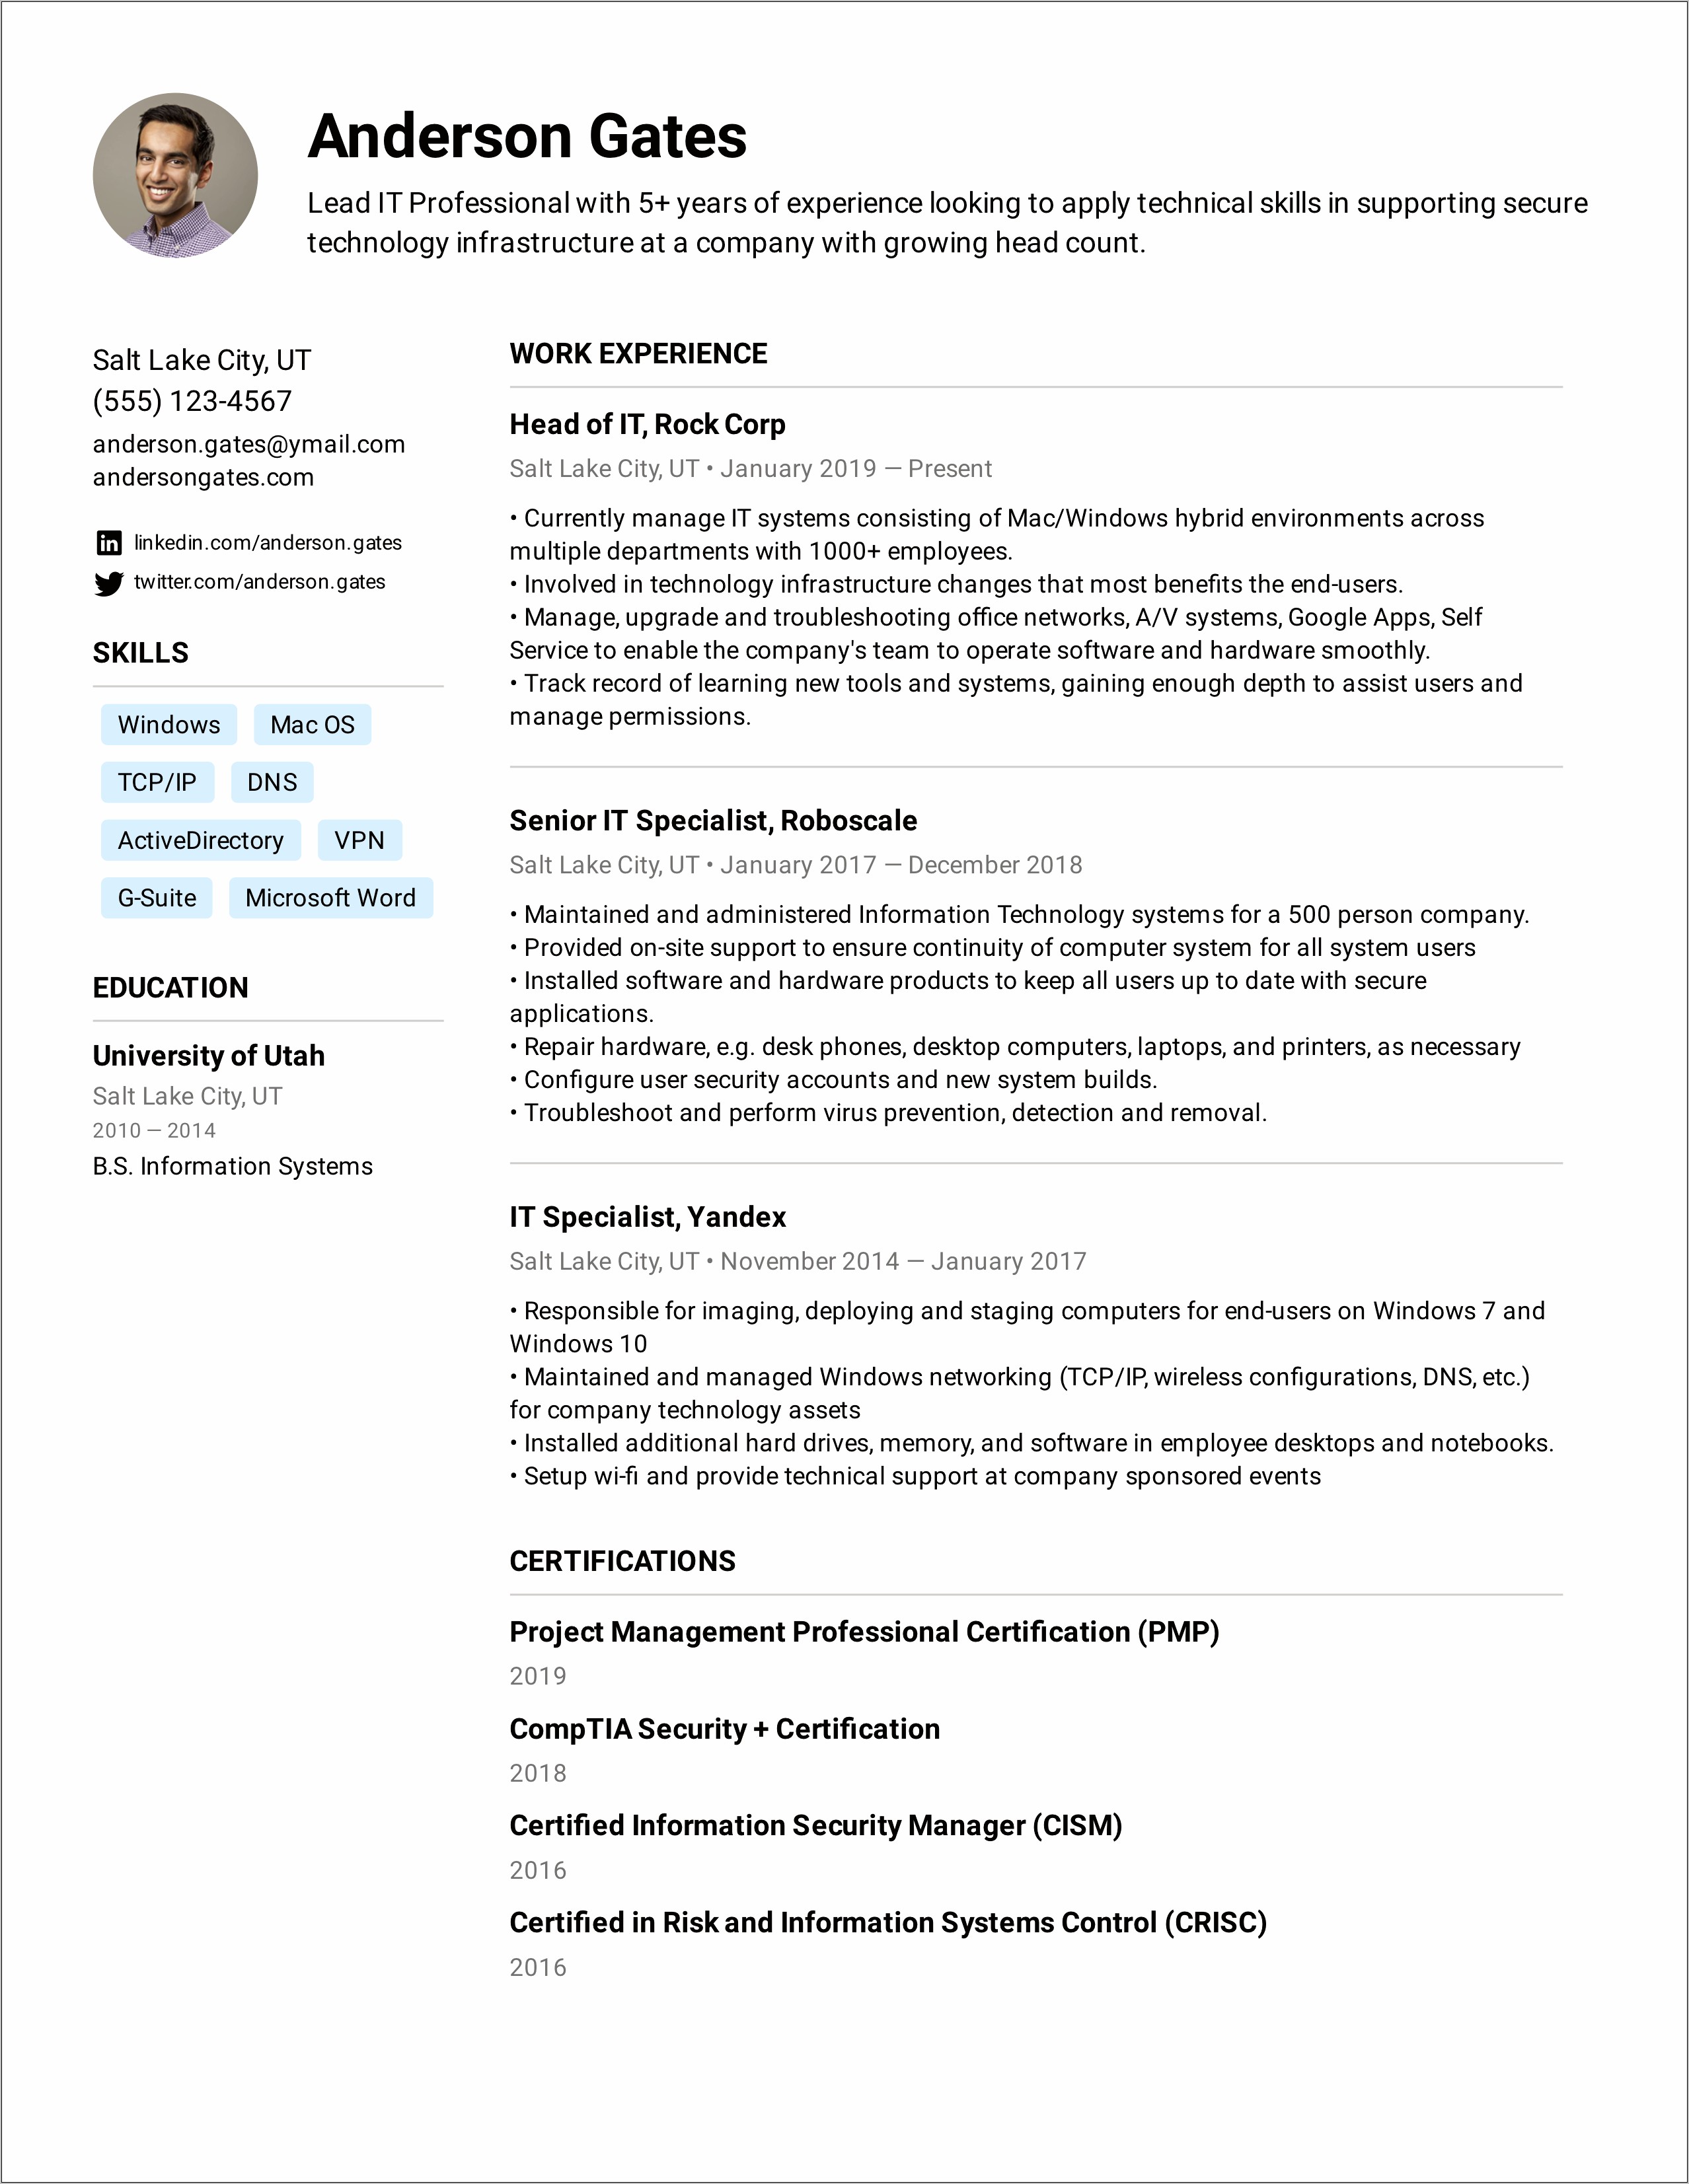 Management Information Systems Resume Summary